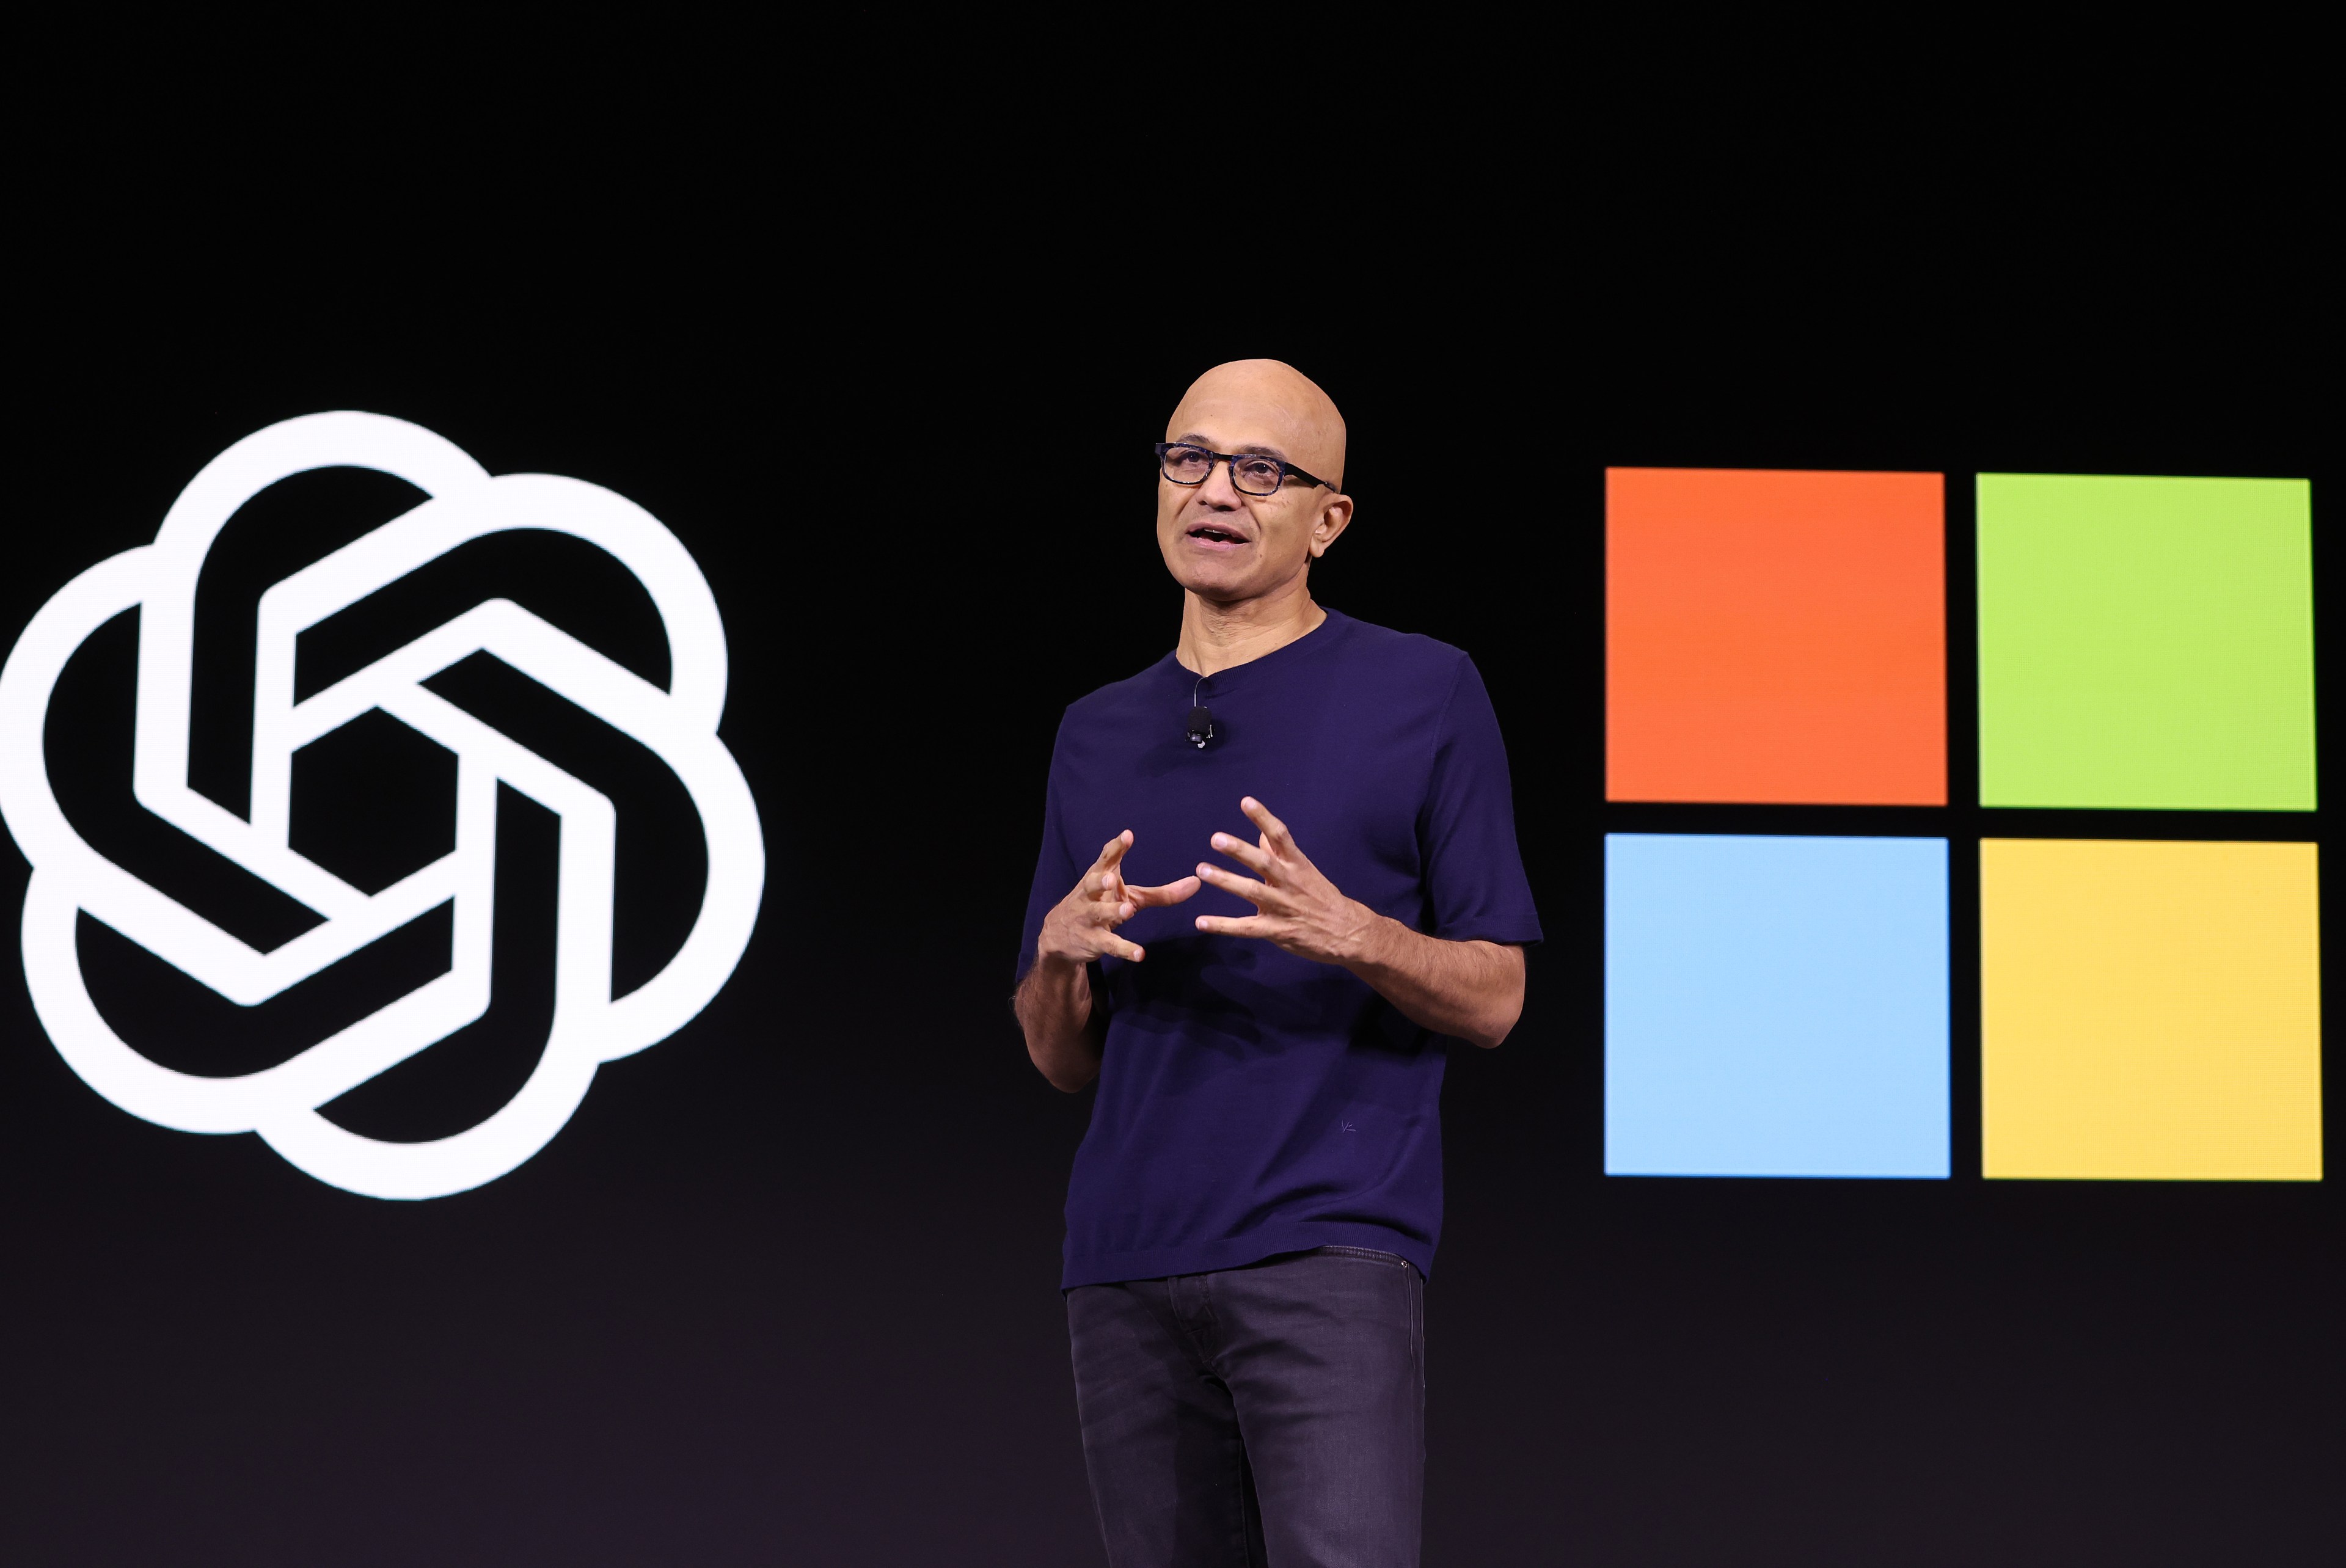 Microsoft CEO Satya Nadella speaks while on stage betwen the OpenAi logo and the Microsoft logo